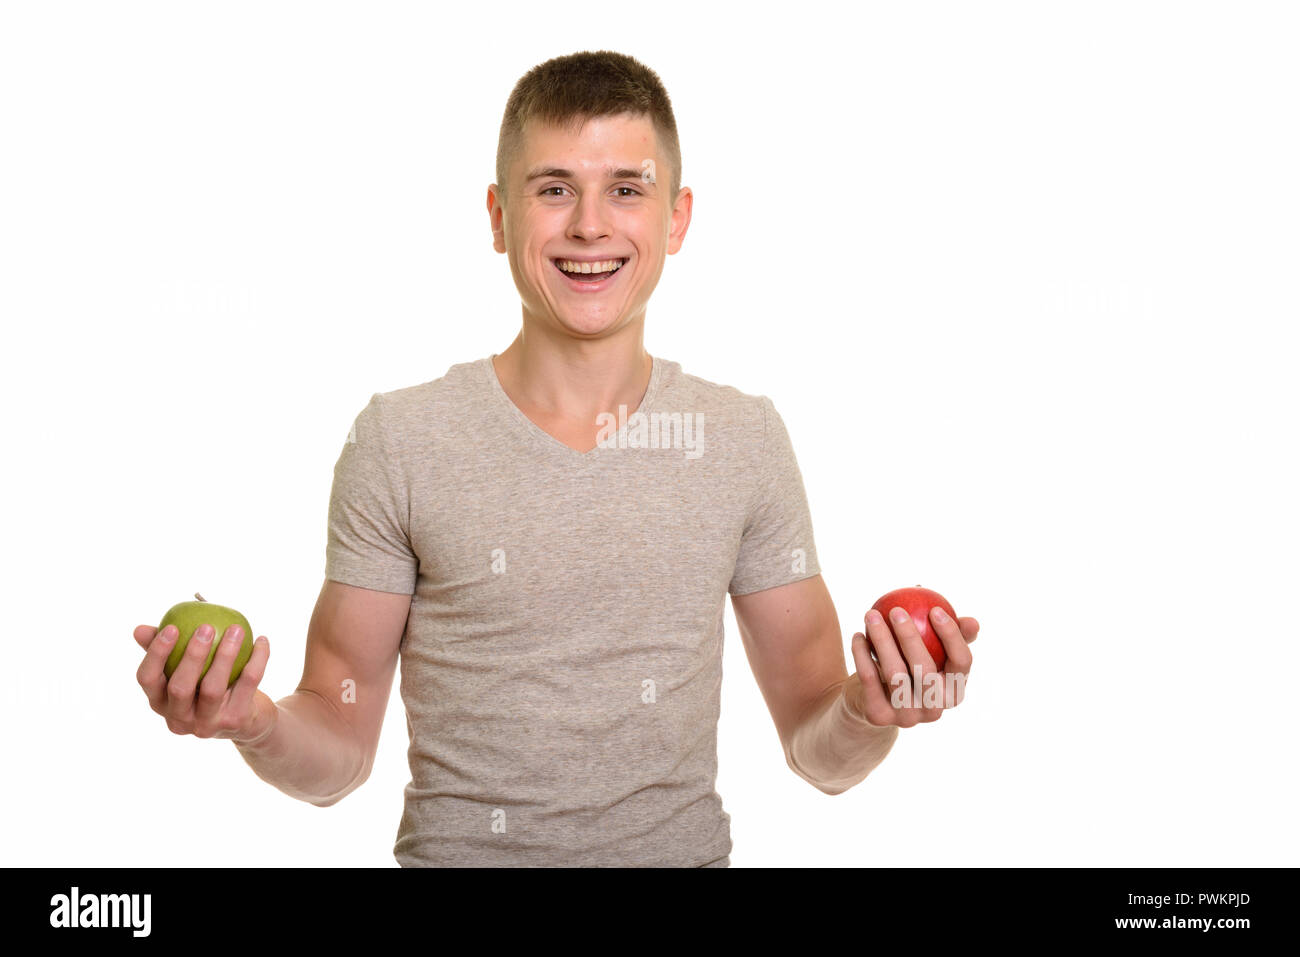 Young happy Caucasian man smiling while holding red and green ap Stock Photo